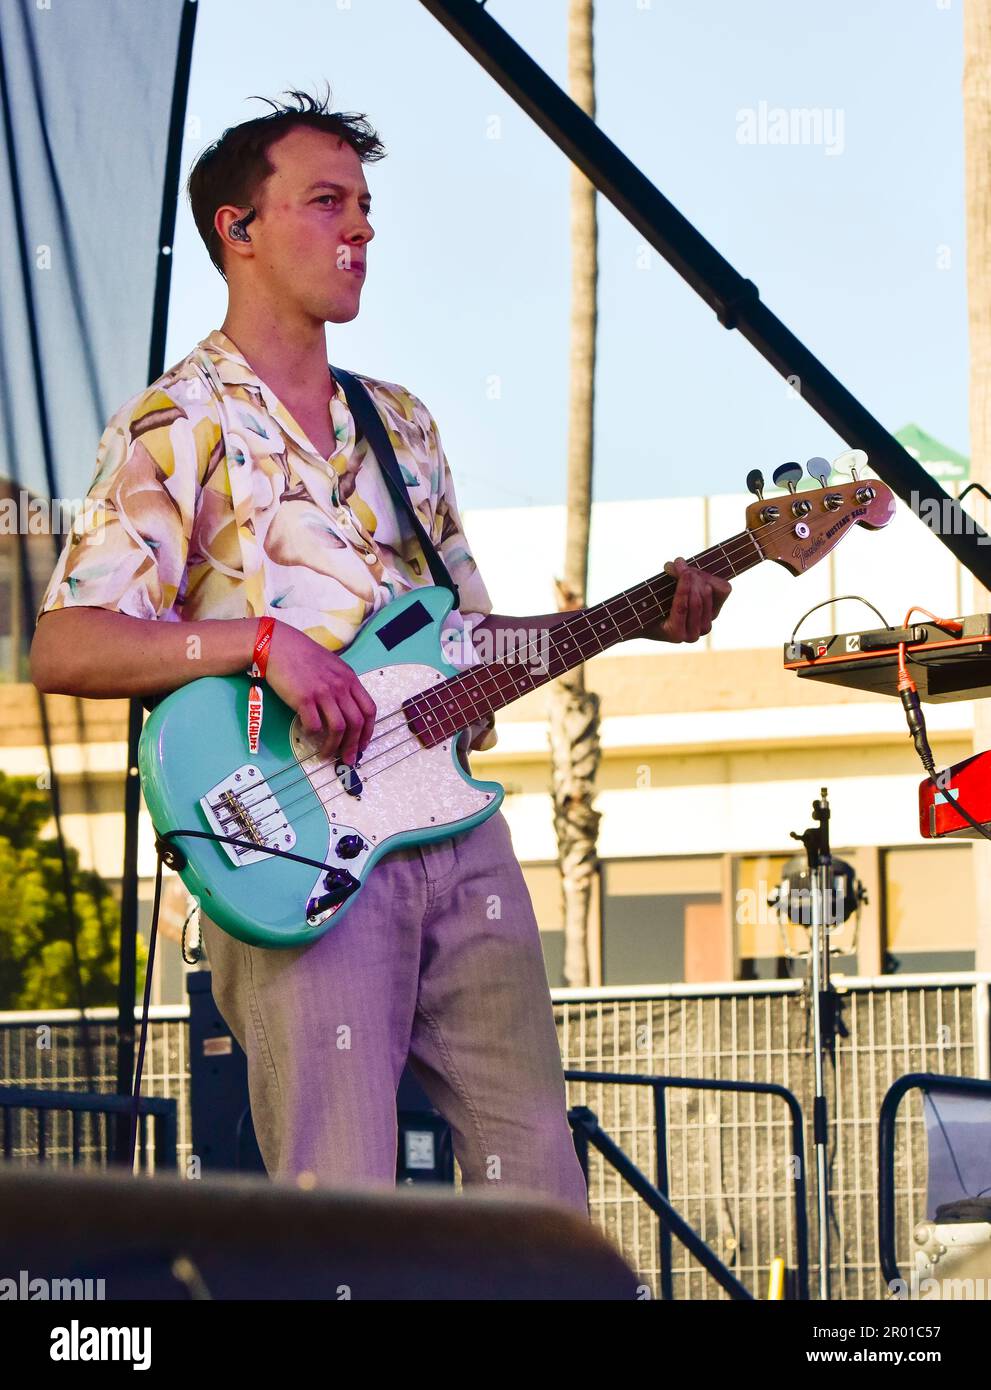 Redondo Beach, California, May 5, 2023 - Max Ernst of SHAED performing on stage at BeachLife Festival 2023. Photo Credit: Ken Howard/Alamy Stock Photo